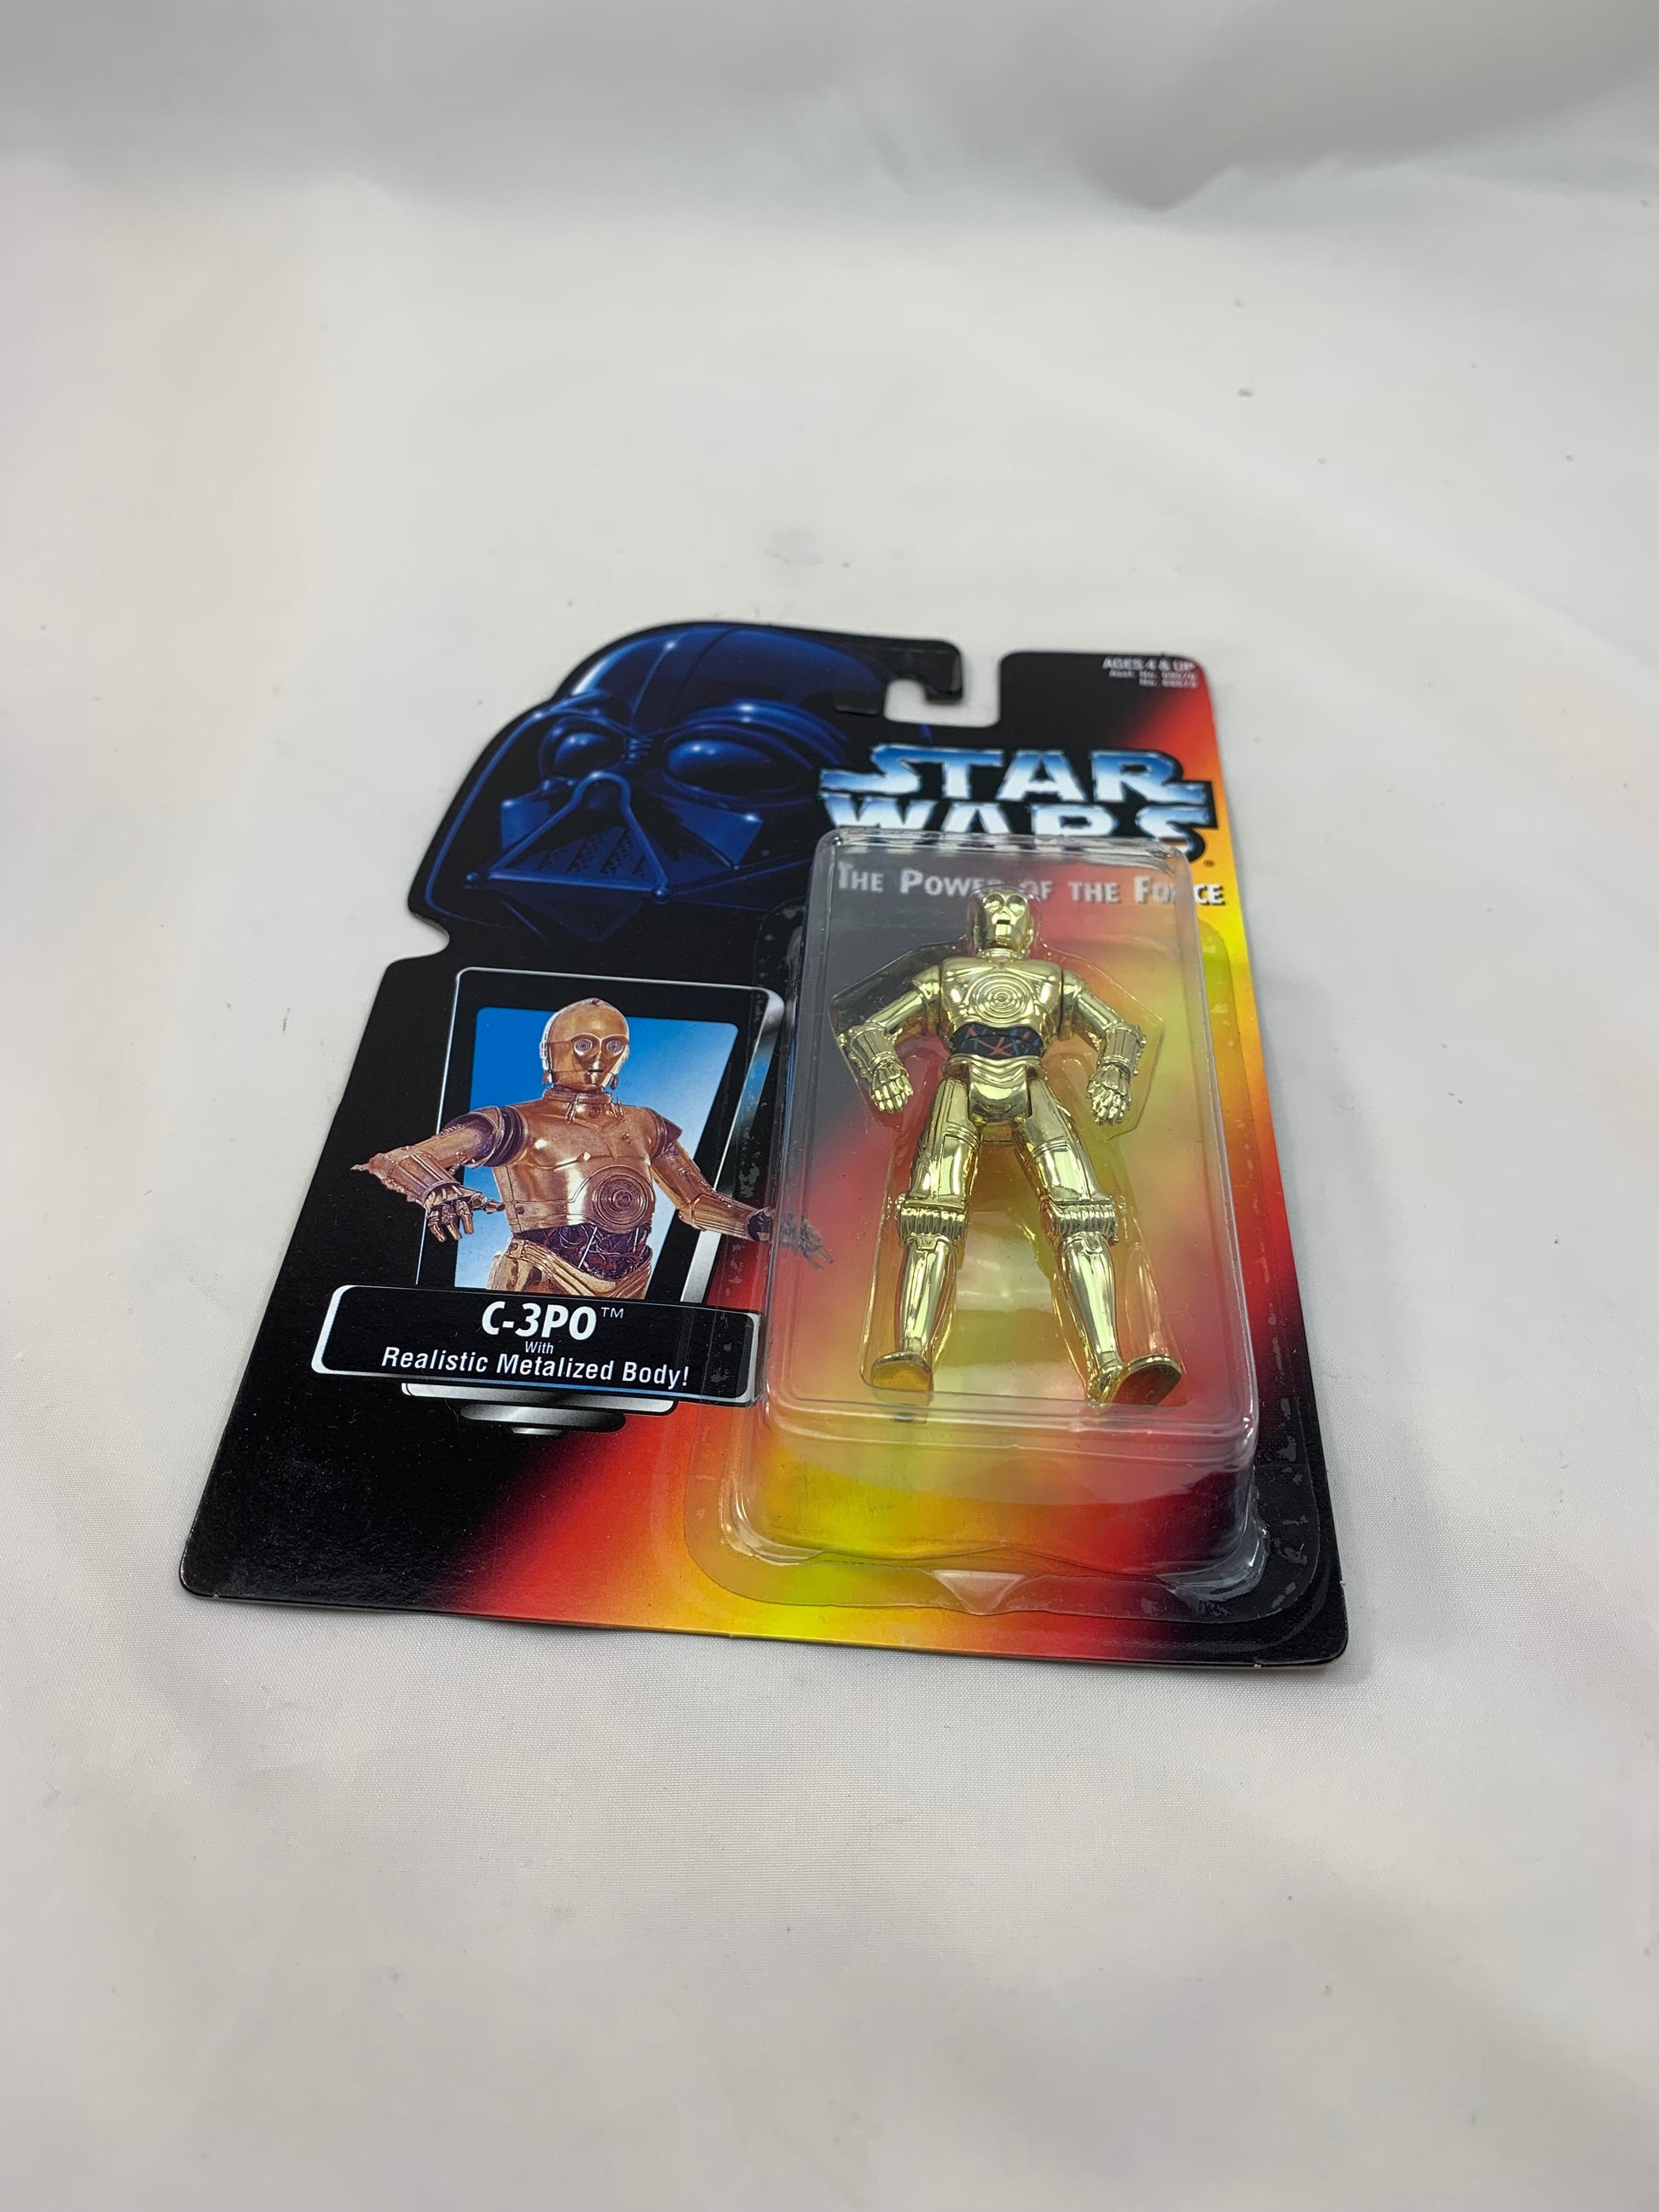 Kenner Hasbro Red Card Star Wars Power Of The Force 2 C3PO 1995 - MOC